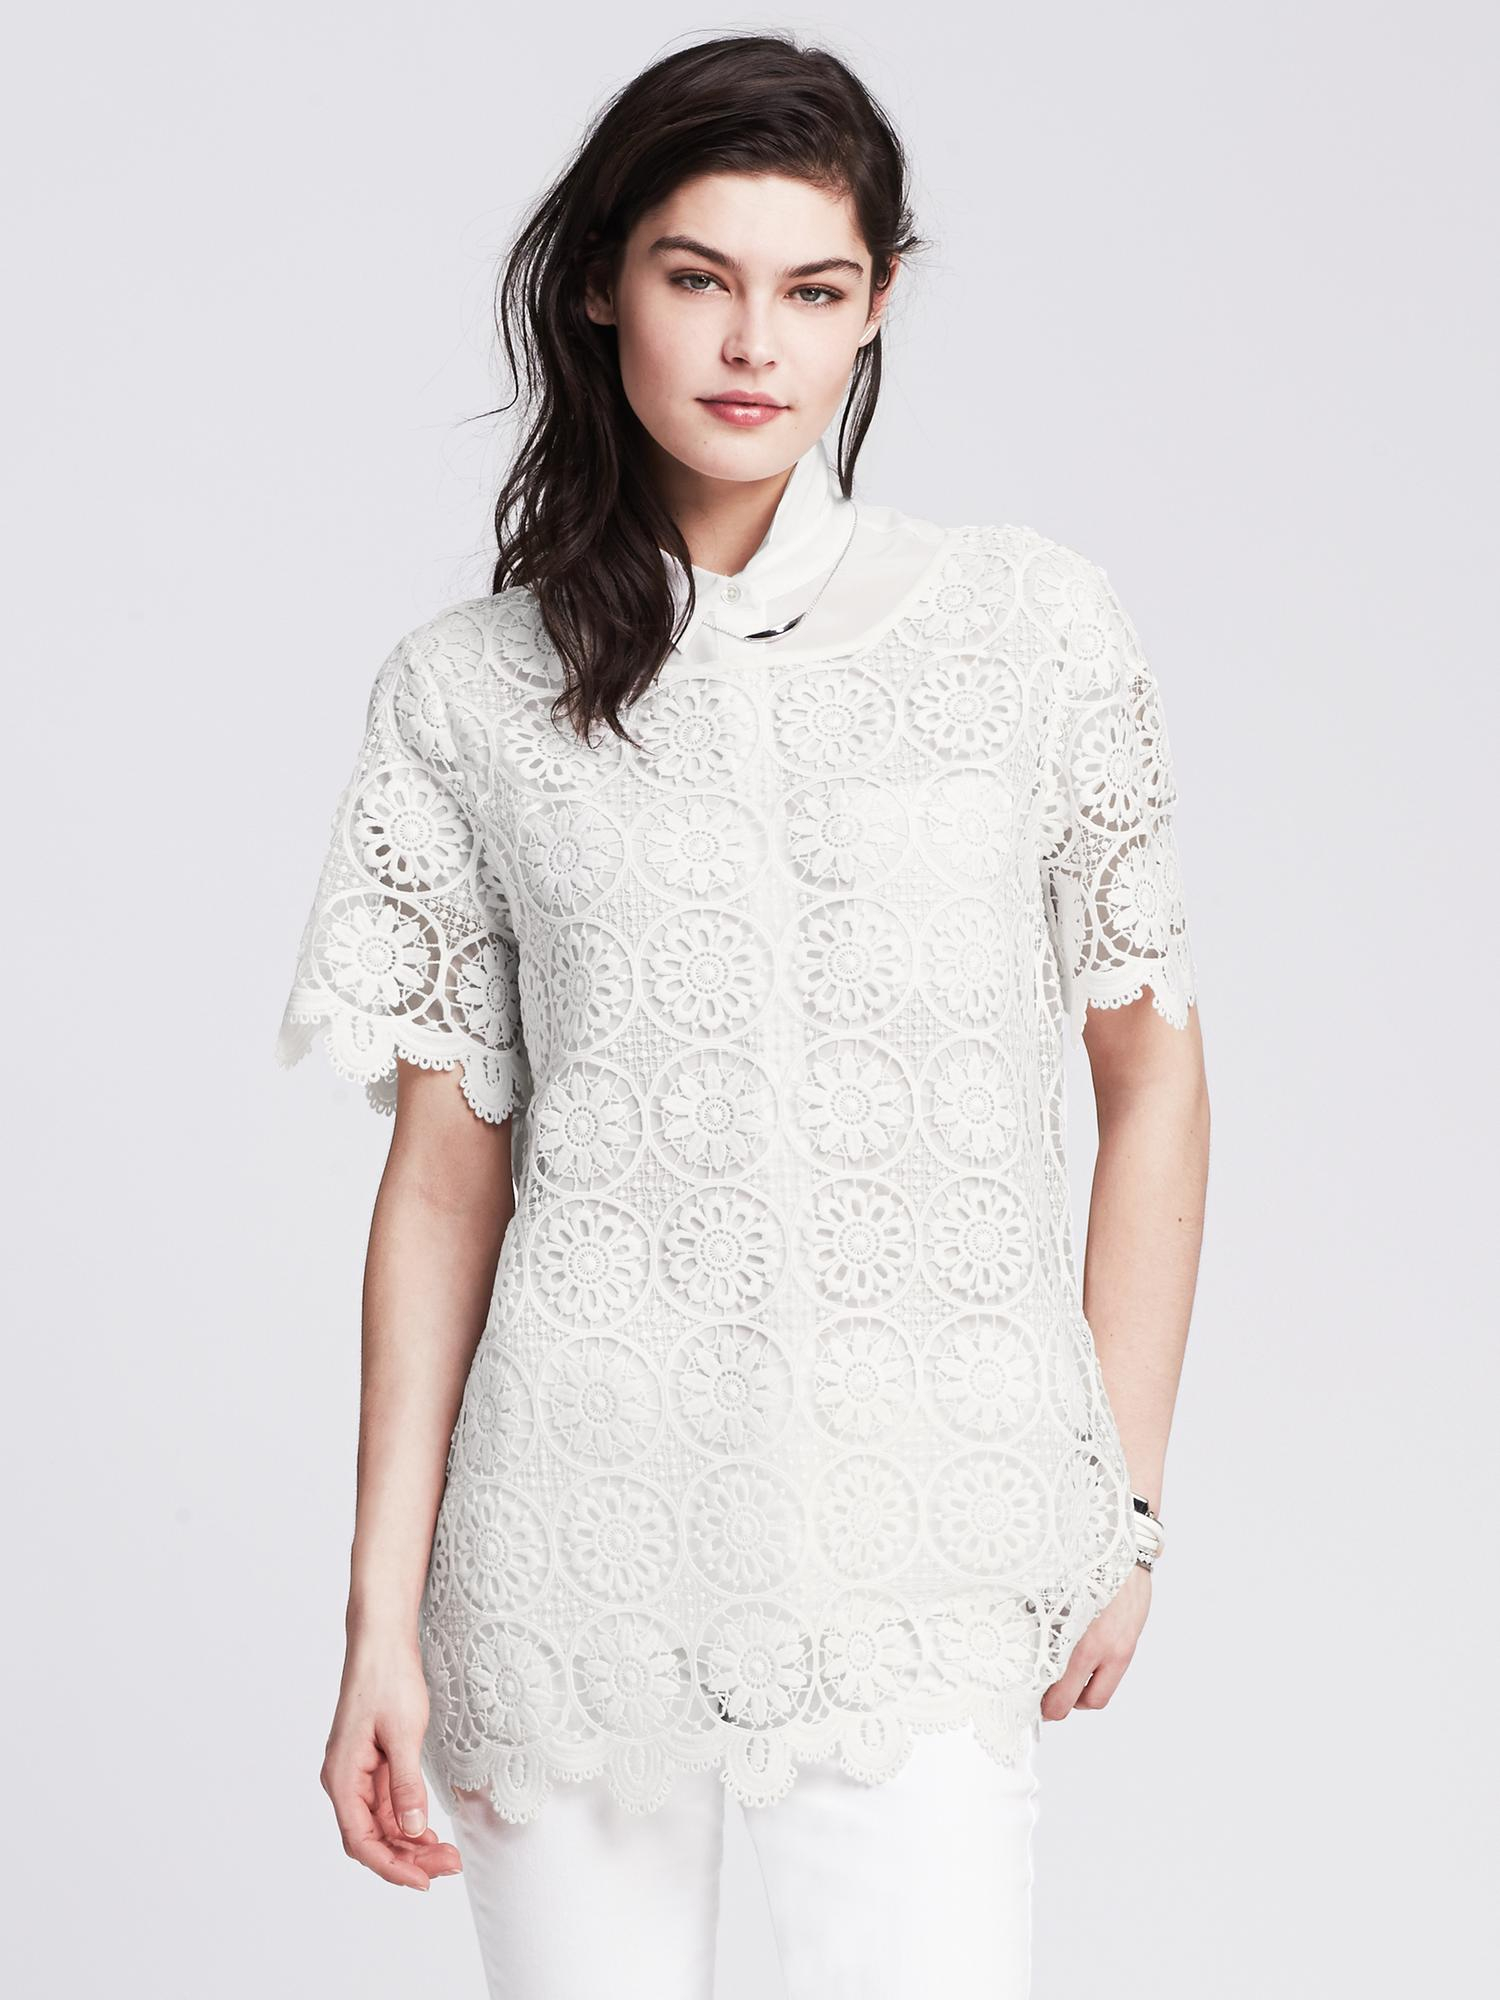 Lyst - Banana Republic Medallion Lace Top in White